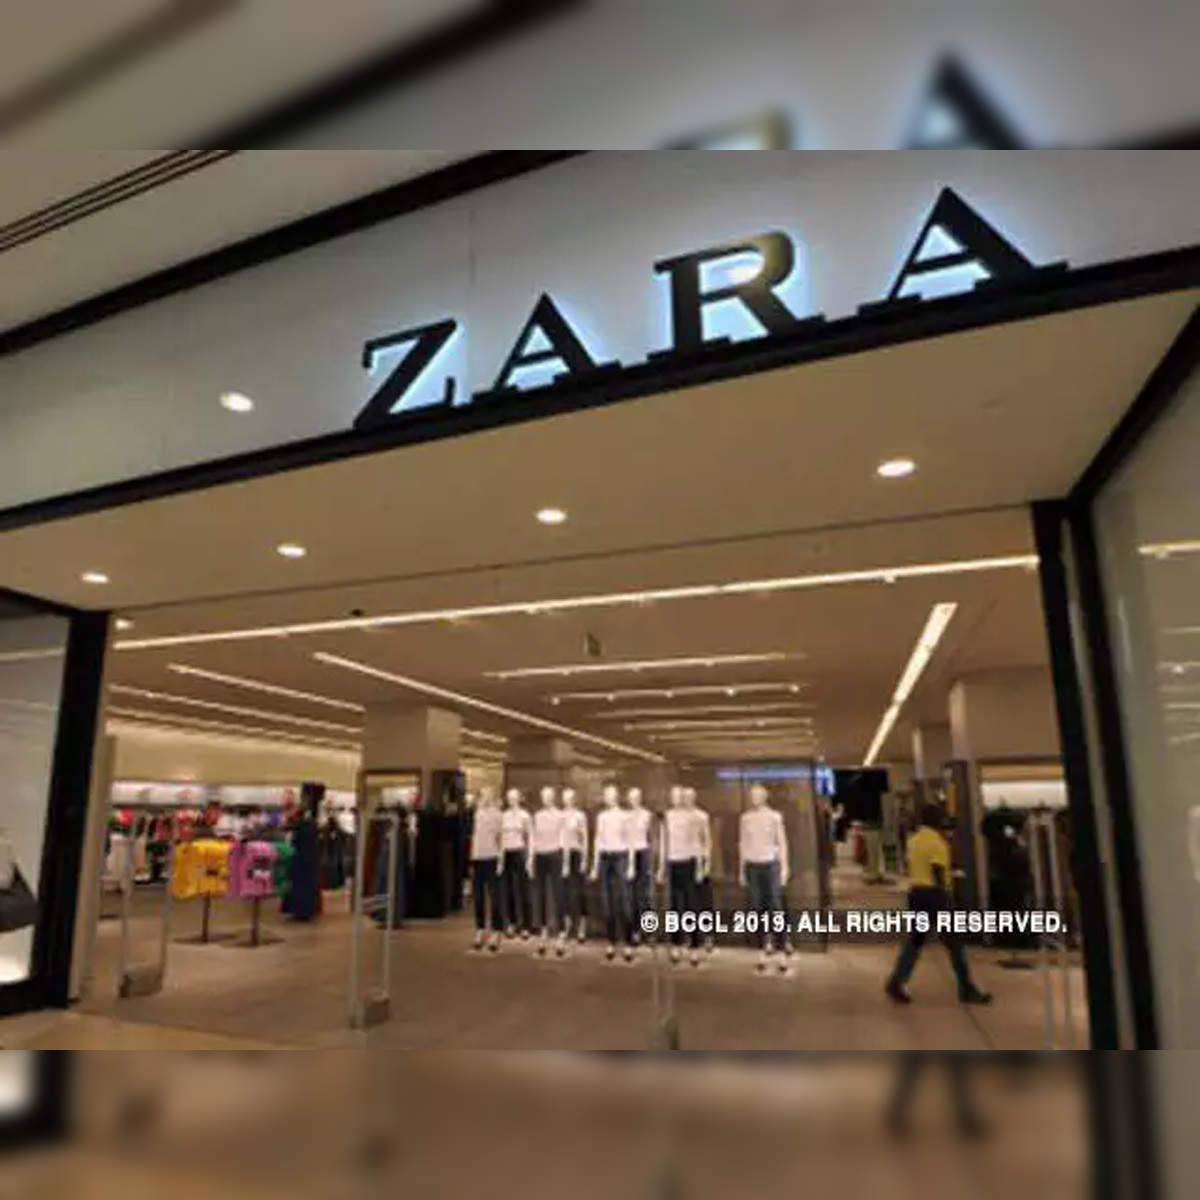 Tata is Planning to open extreme fast fashion stores like Zara